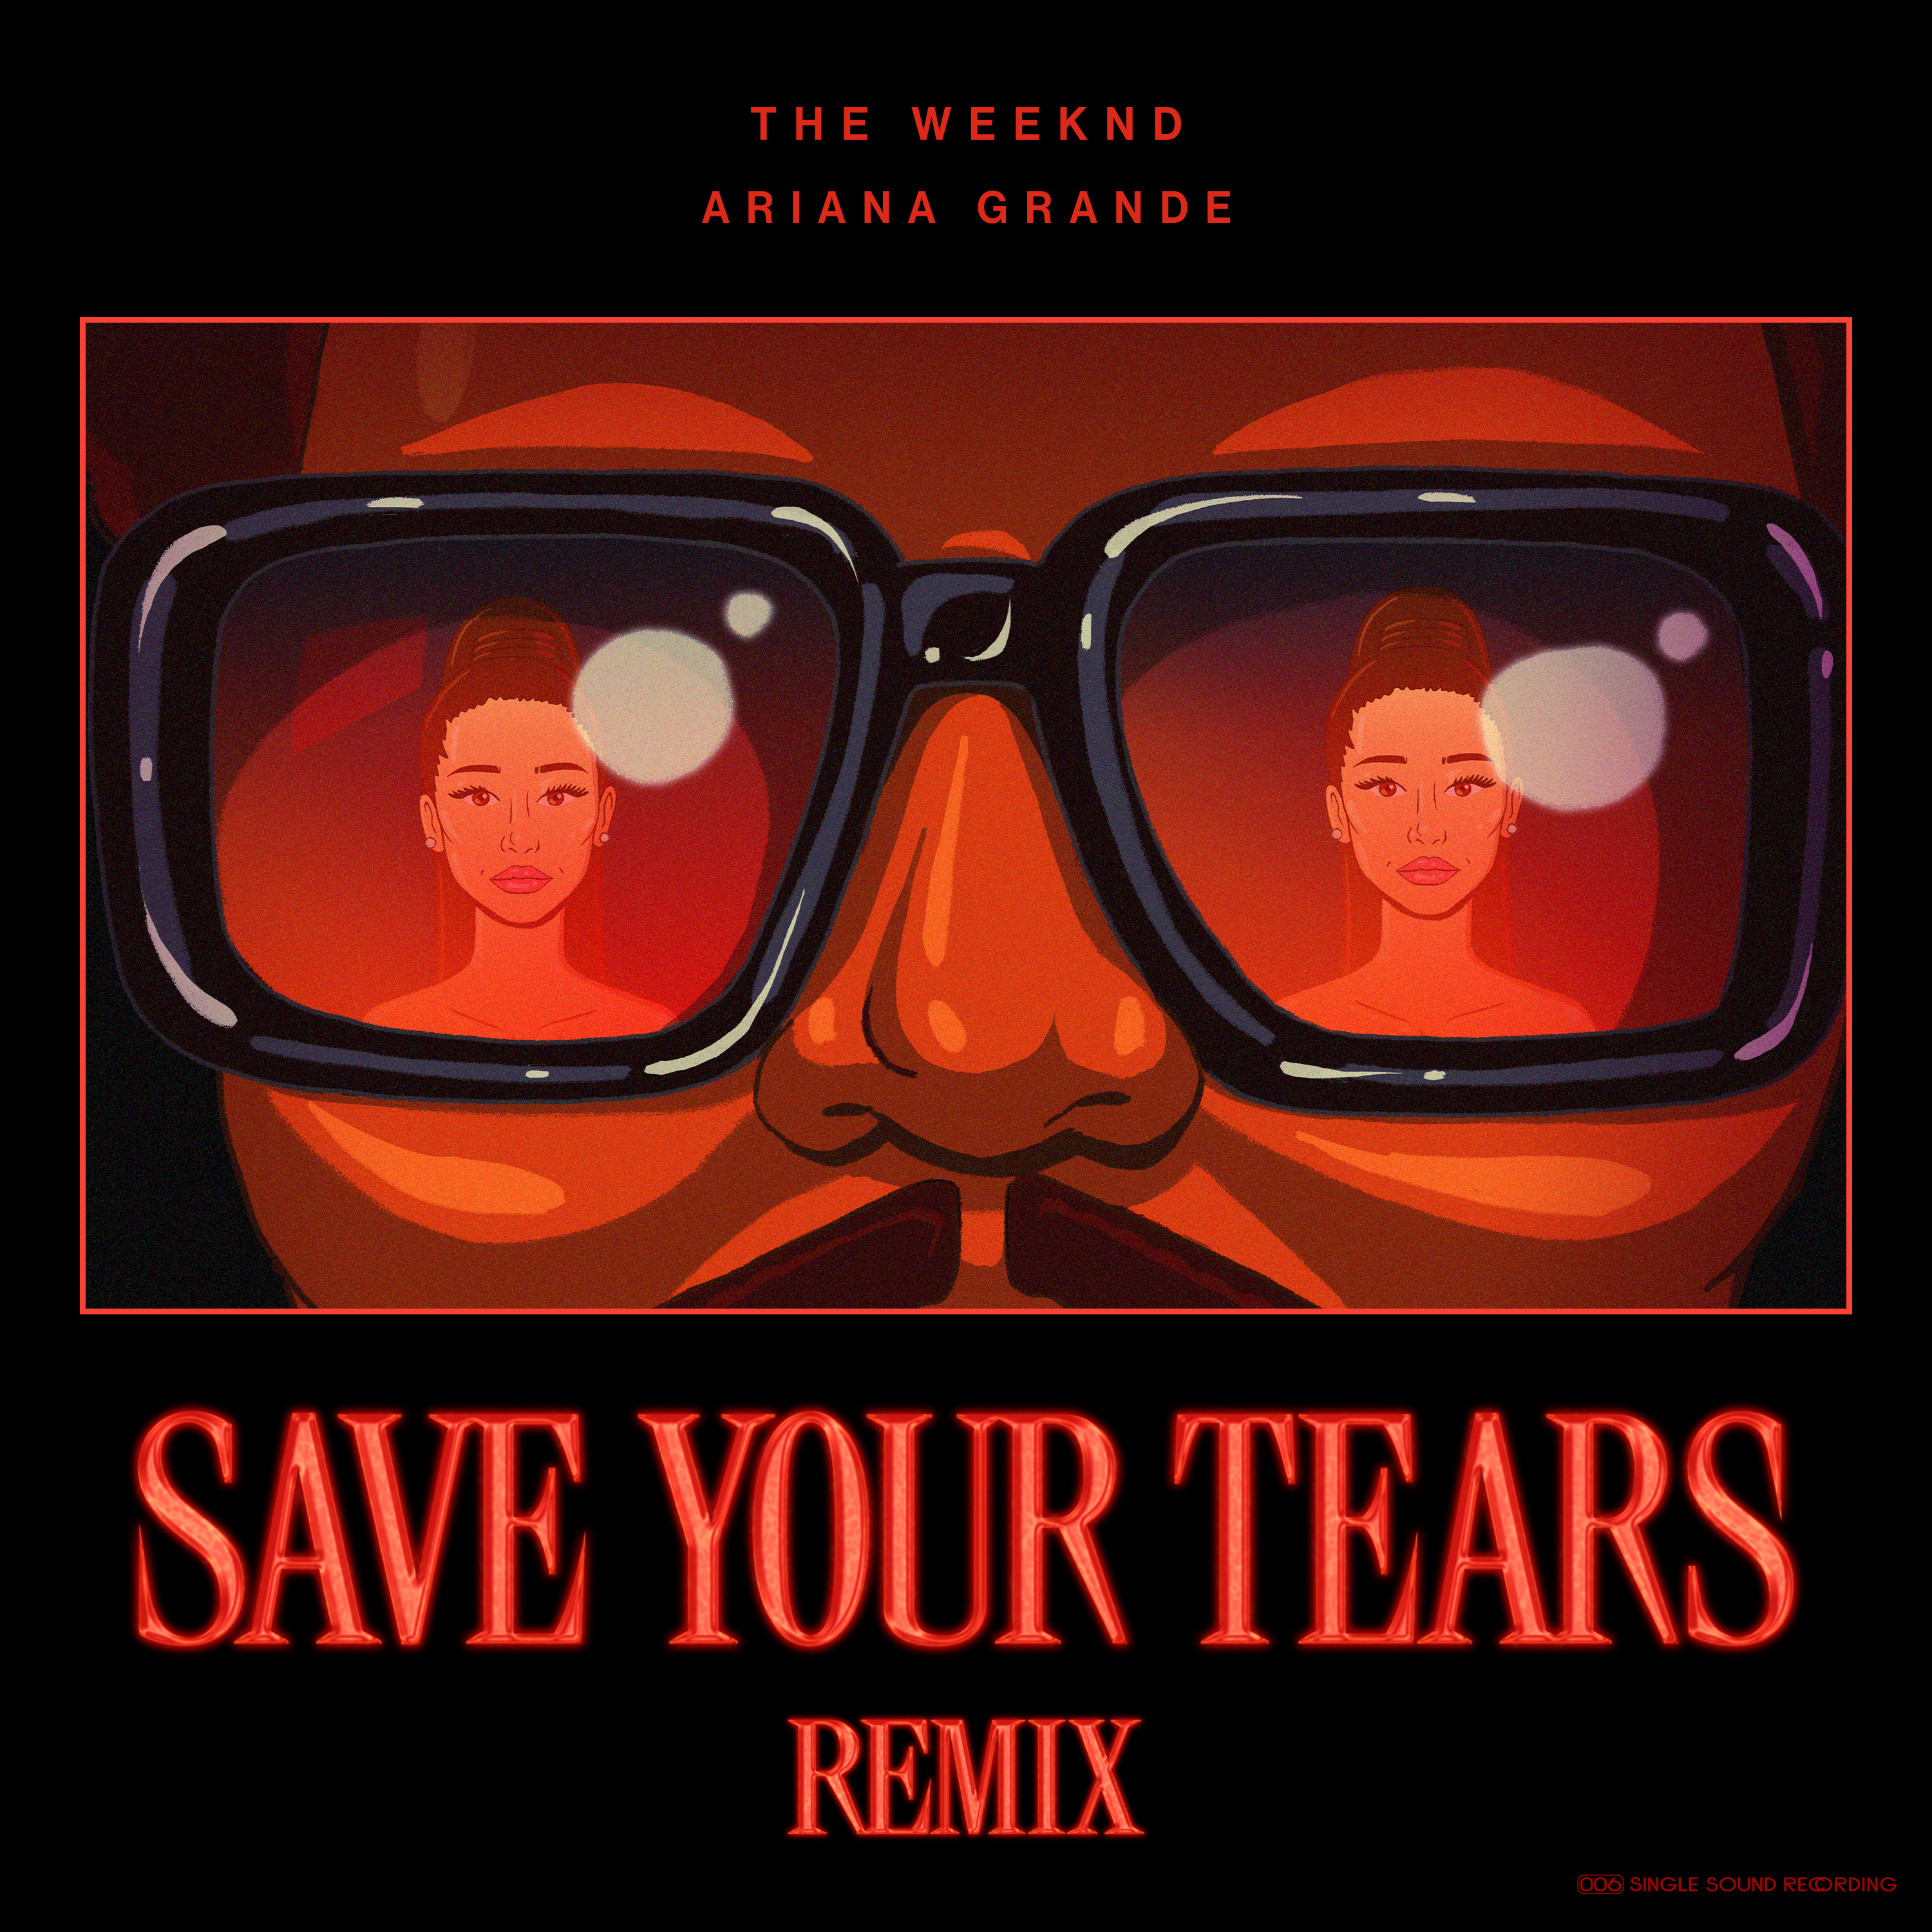 THE WEEKND RELEASES SAVE YOUR TEARS REMIX AND OFFICIAL VIDEO FEATURING ARIANA GRANDE